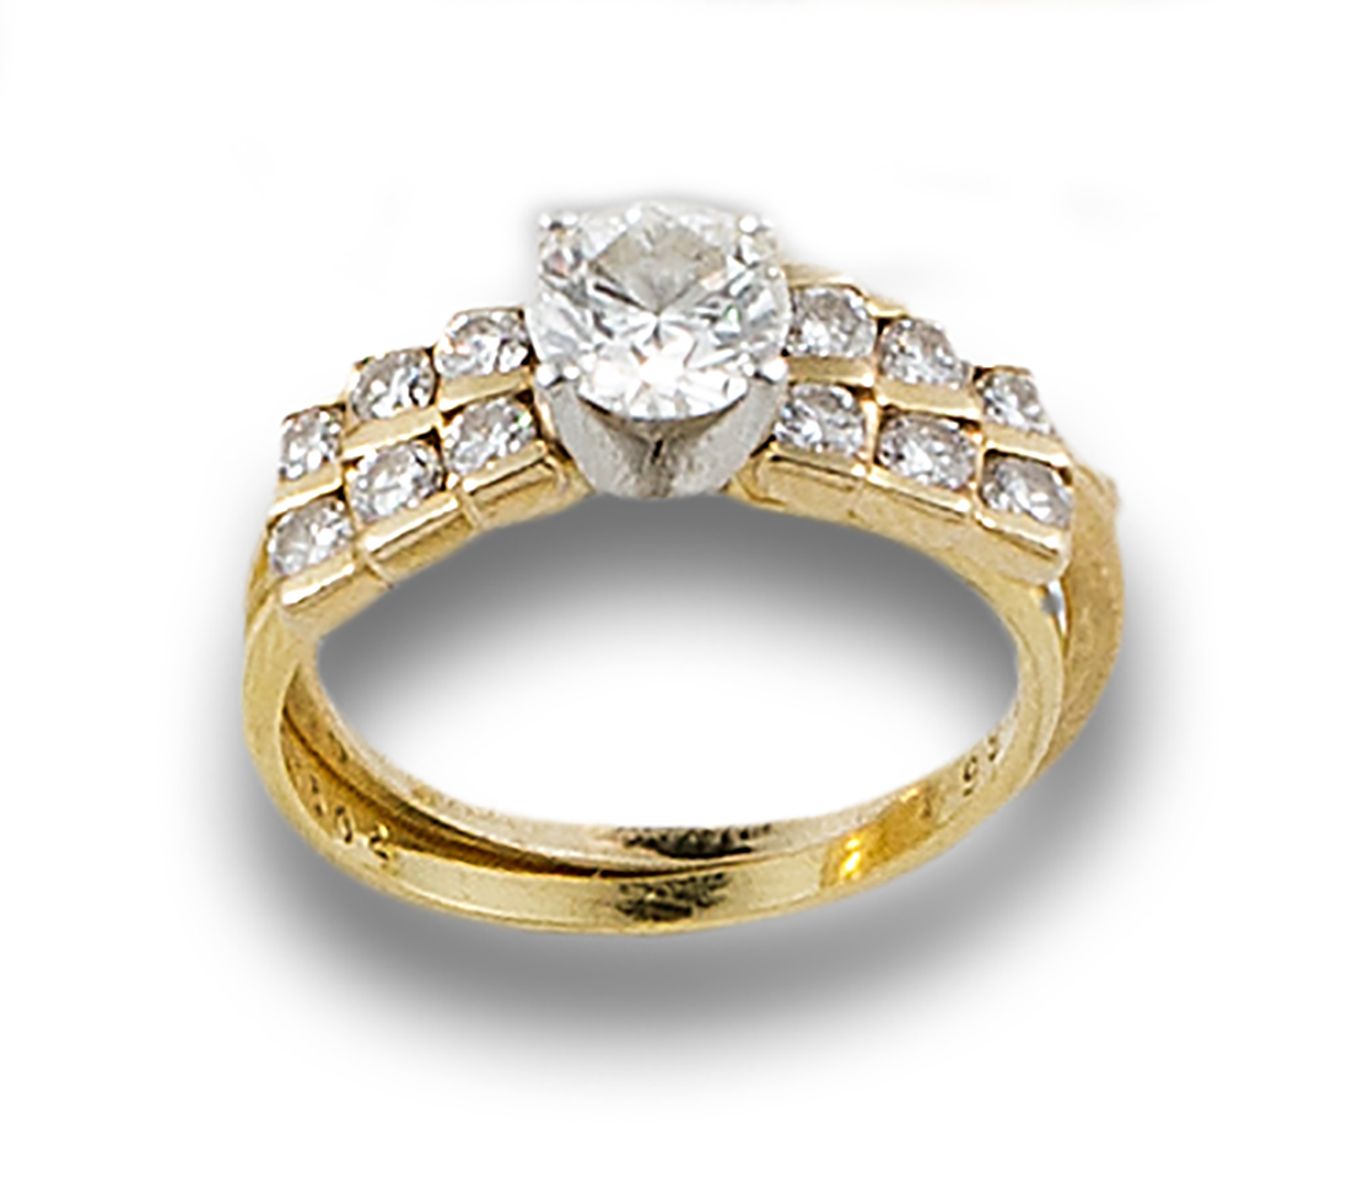 18 kt yellow gold solitaire ring. With central diamond, brilliant cut, estimated&hellip;